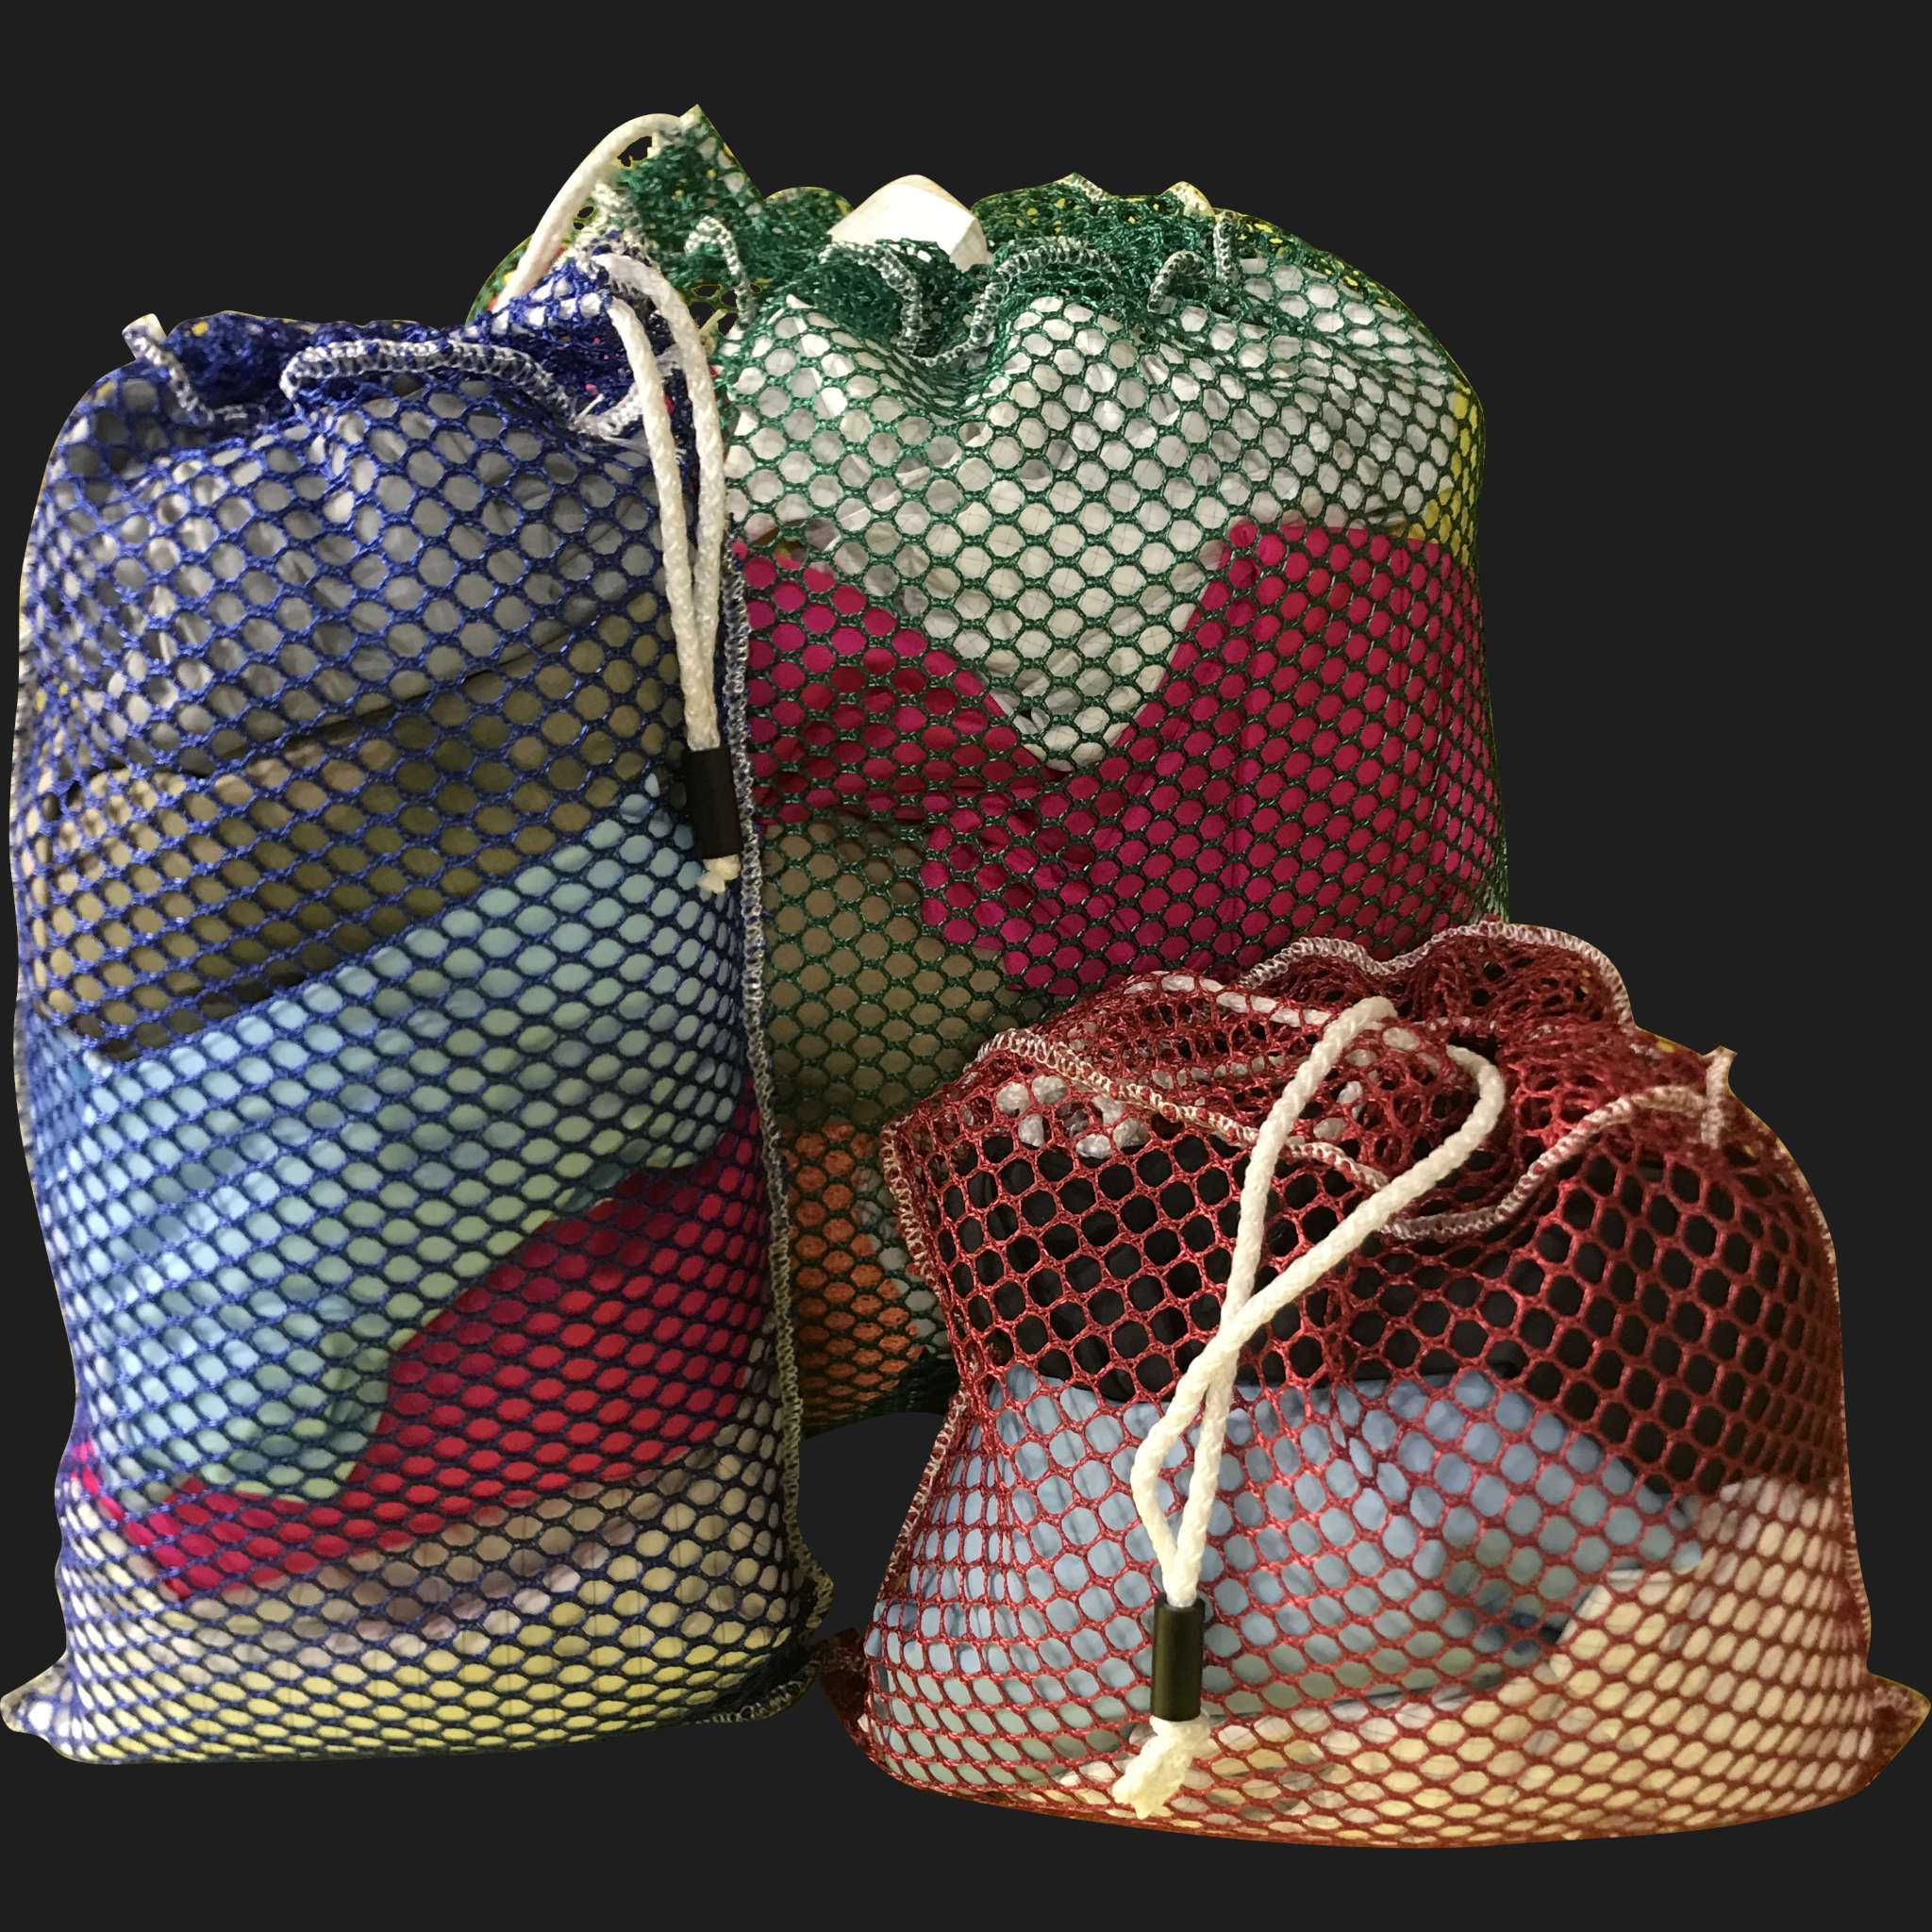 54" x 78" Customized Mesh-Net-Laundry Bags Heavy Duty with Cord and barrellock closure